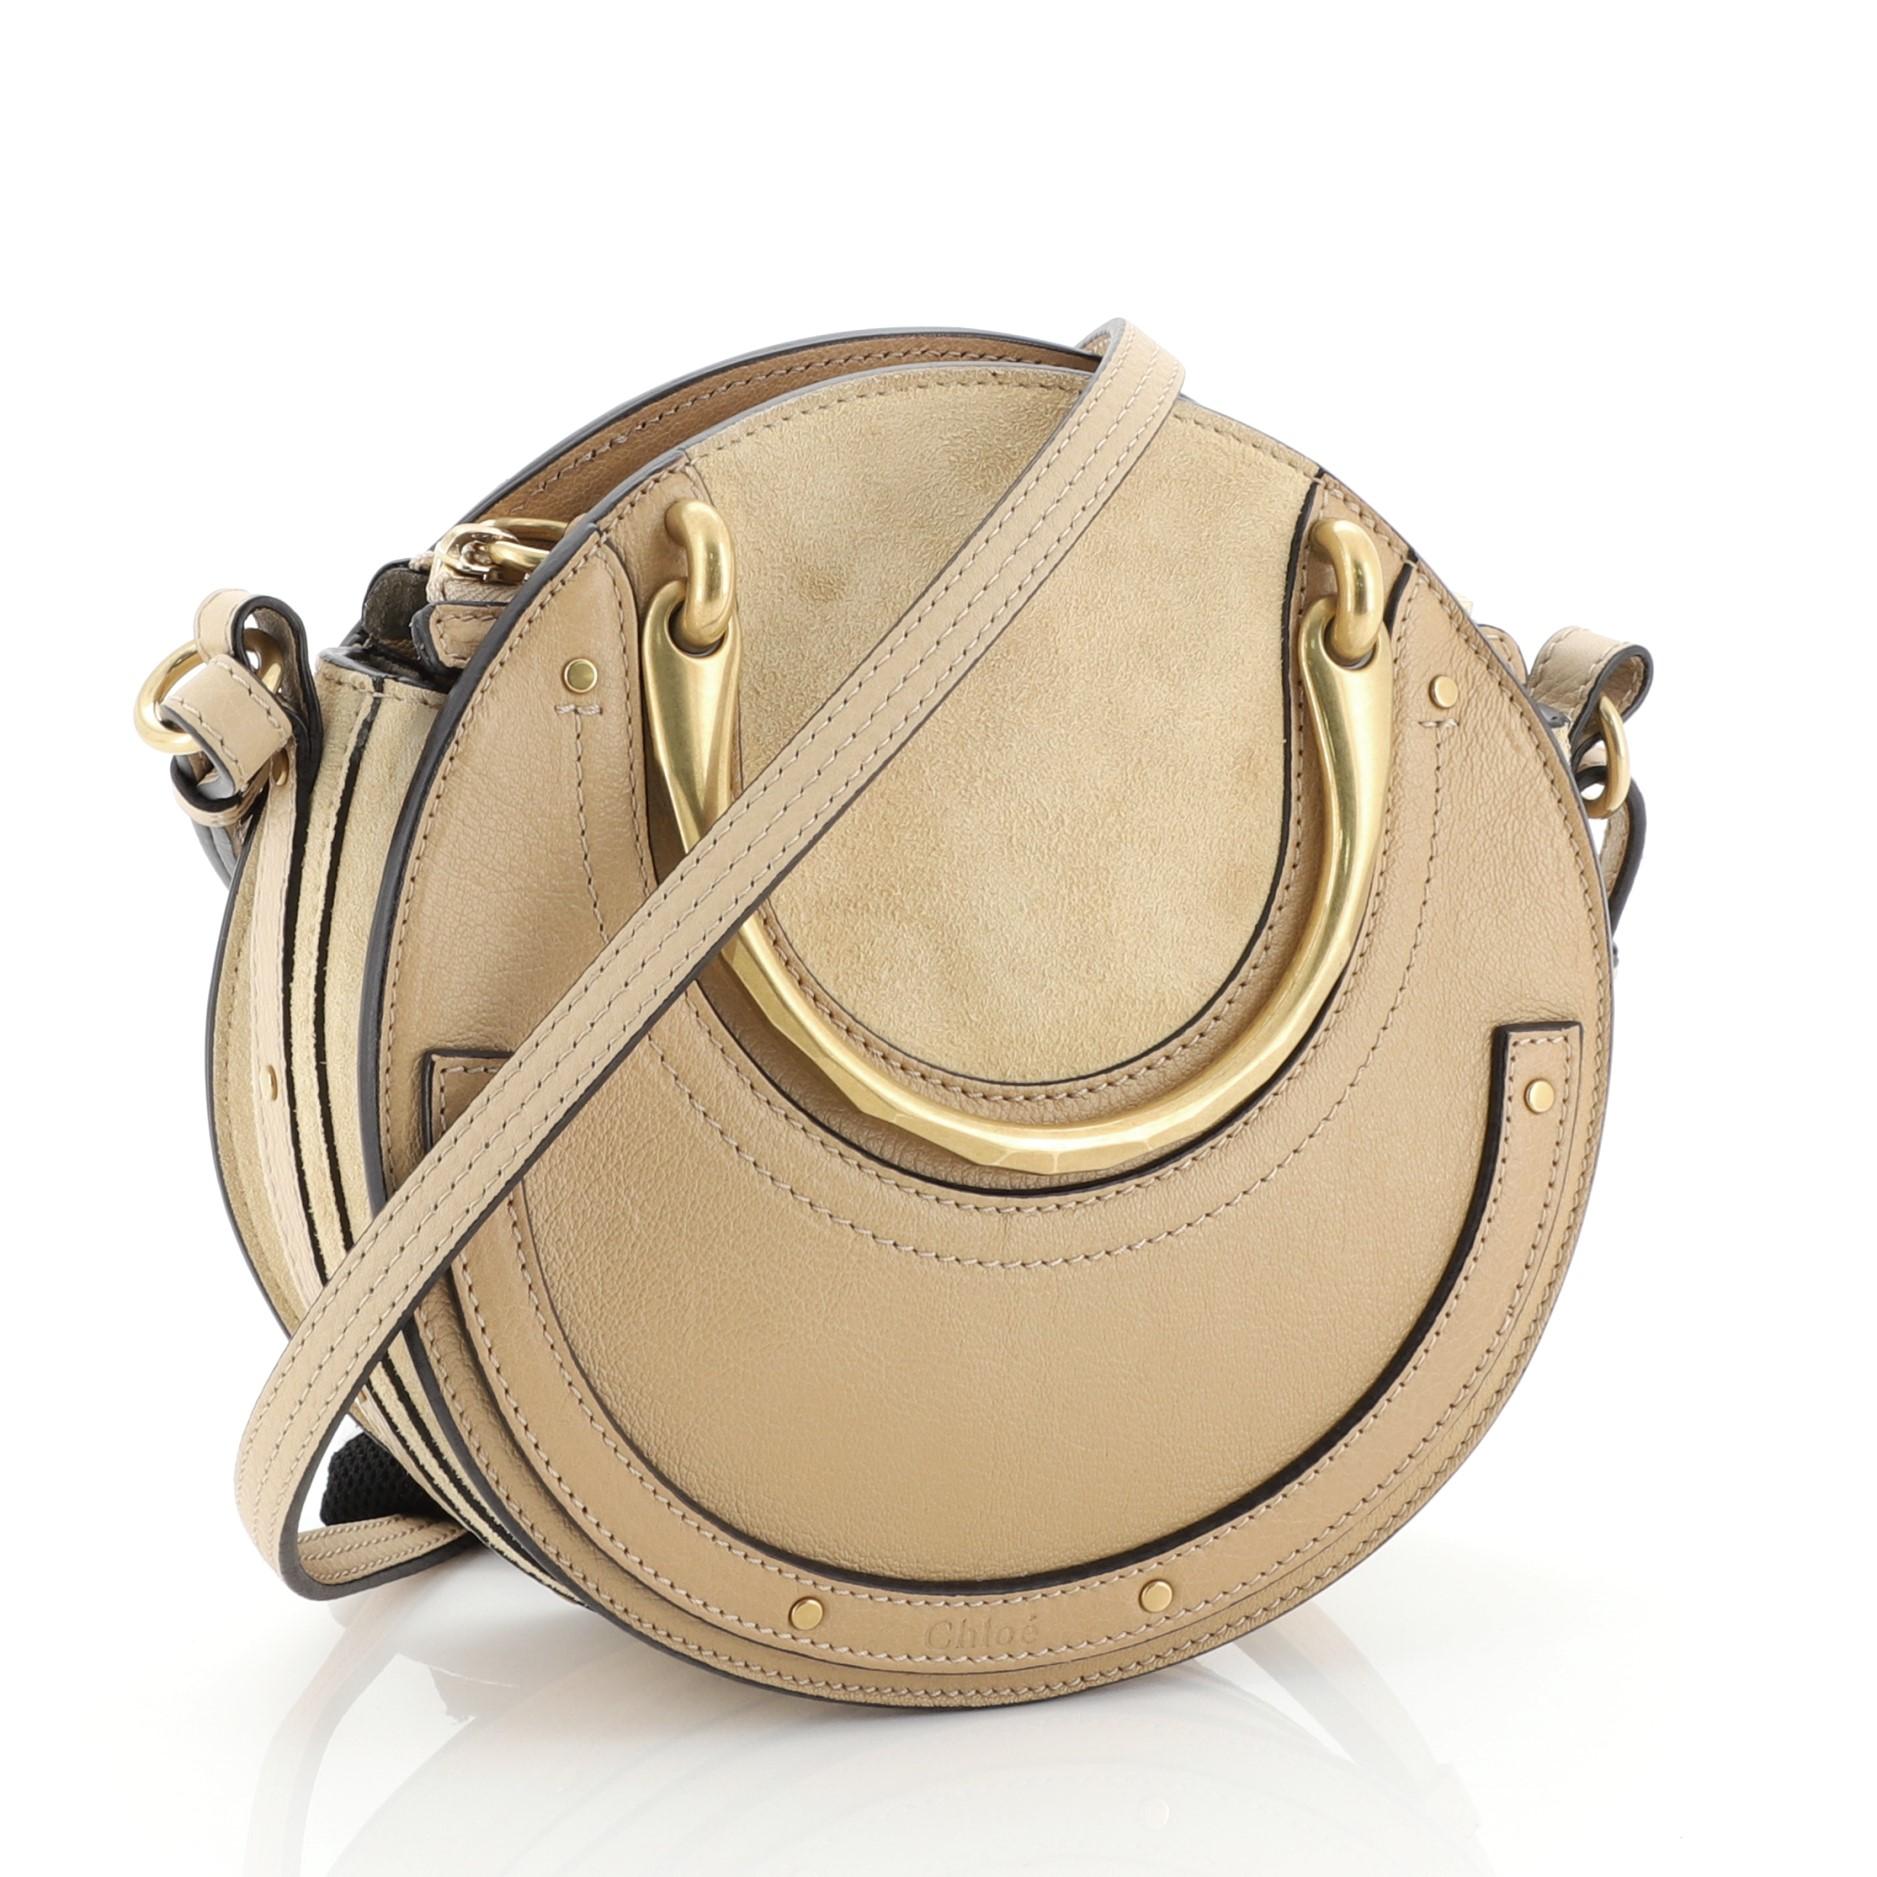 This Chloe Pixie Crossbody Bag Leather and Suede Small, crafted in neutral leather, features dual matte gold handles, round silhouette and matte gold-tone hardware. Its zip closure opens to a neutral suede interior with slip pocket. 


Estimated